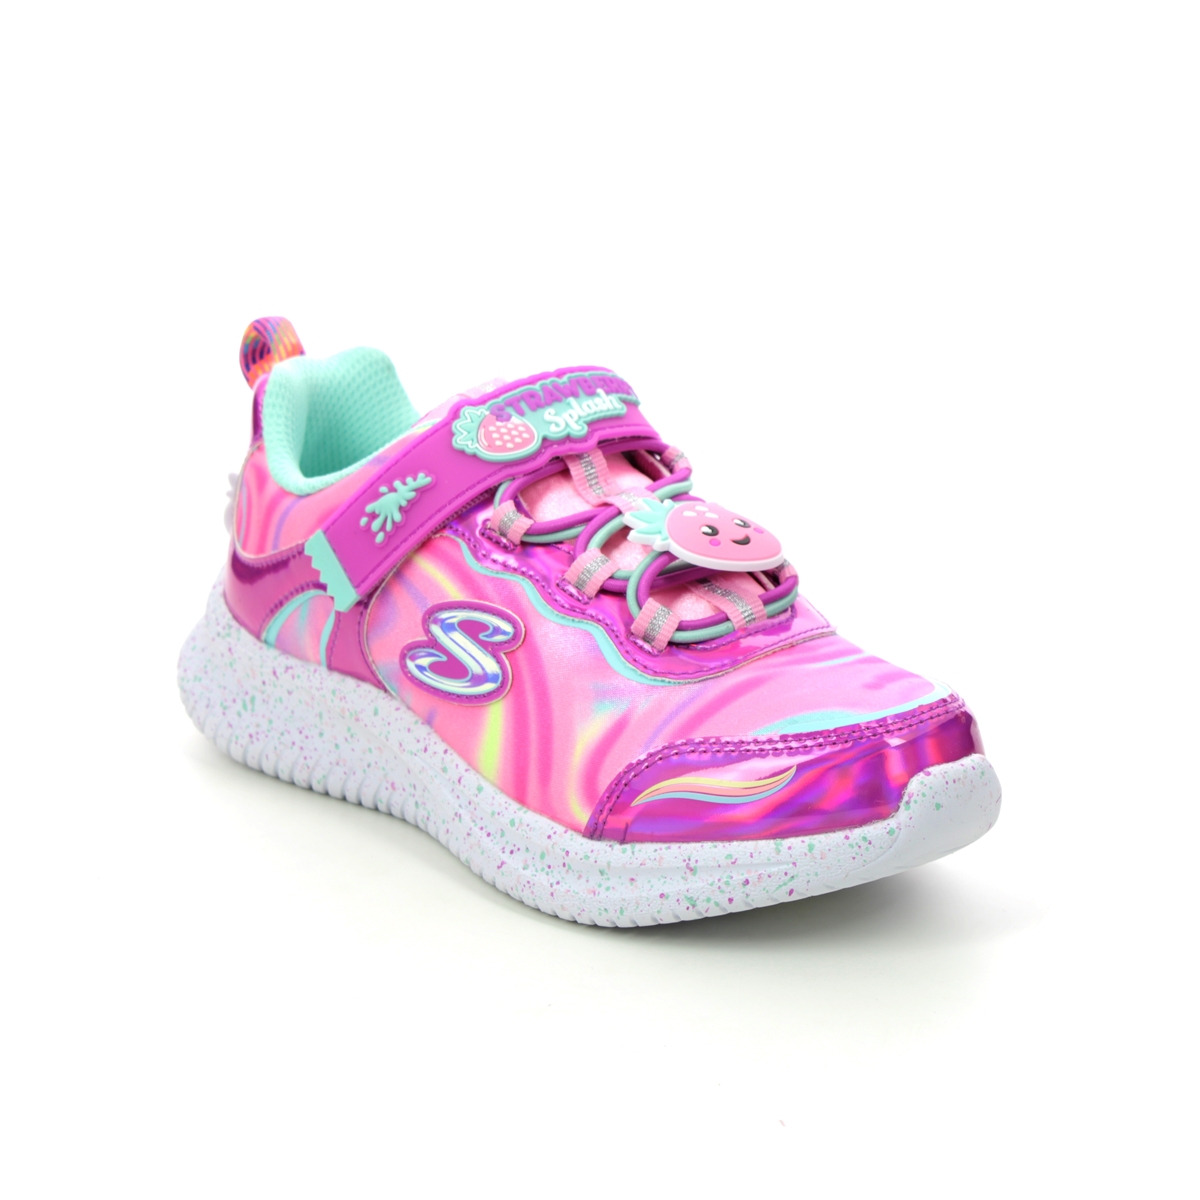 Skechers Jumpsters Sweet Pink Kids Girls Trainers 302215L In Size 26 In Plain Pink For kids